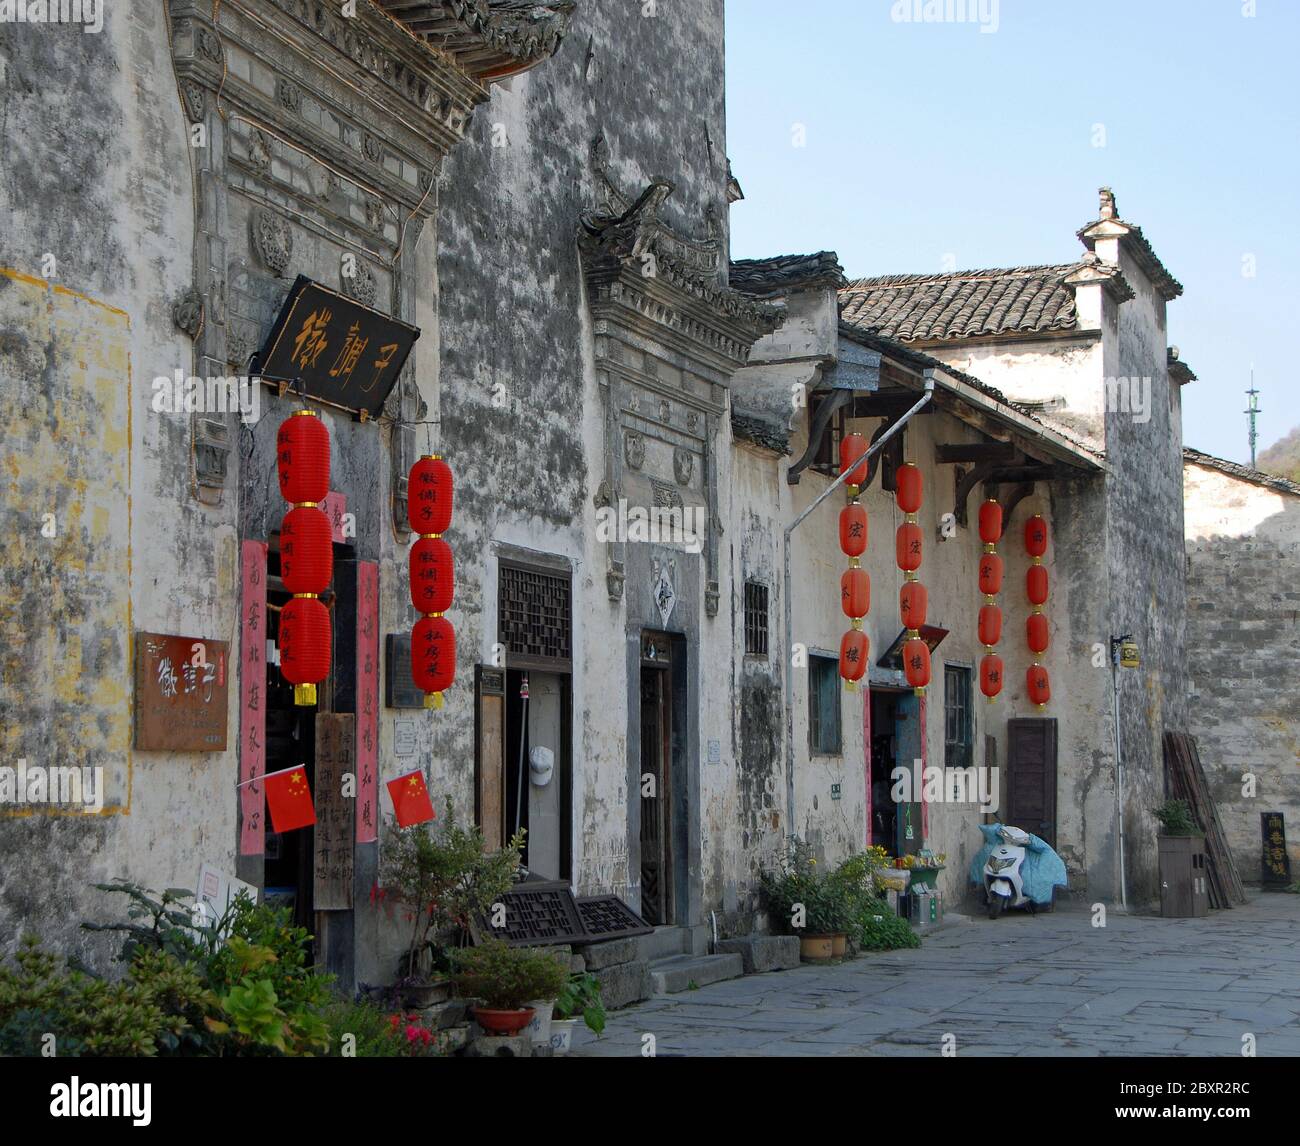 Xidi Ancient Town in Anhui Province, China. Architecture of the historical town of Xidi showing old houses with red lanterns Stock Photo